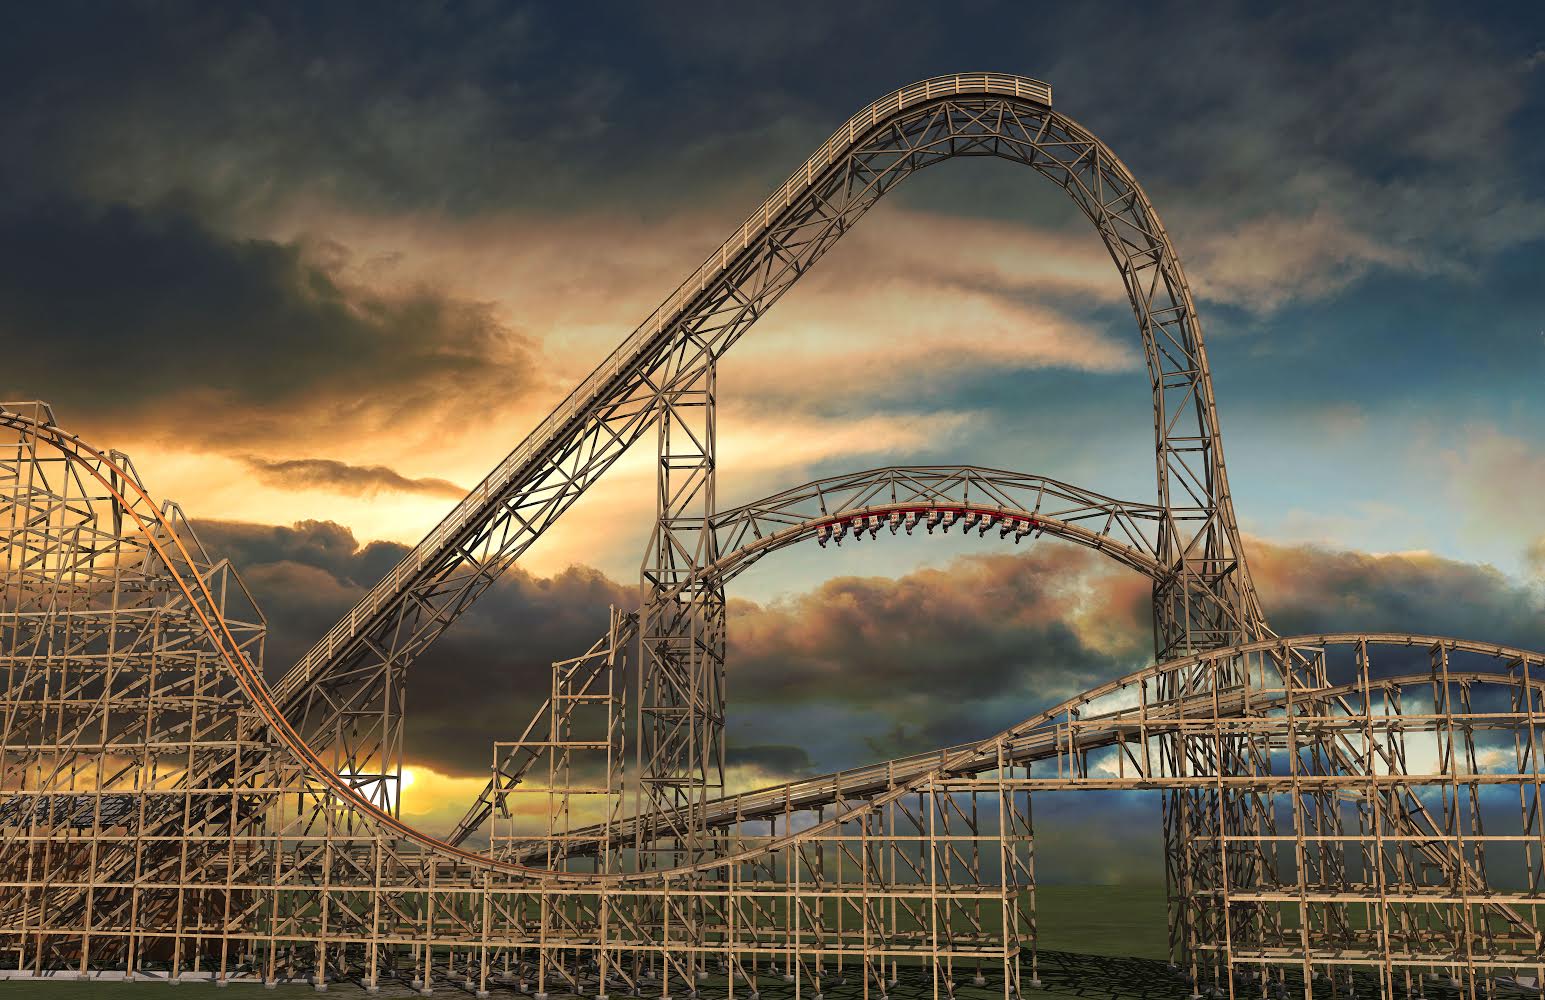 Six Flags Great America unveils new roller coaster Goliath The Spectator